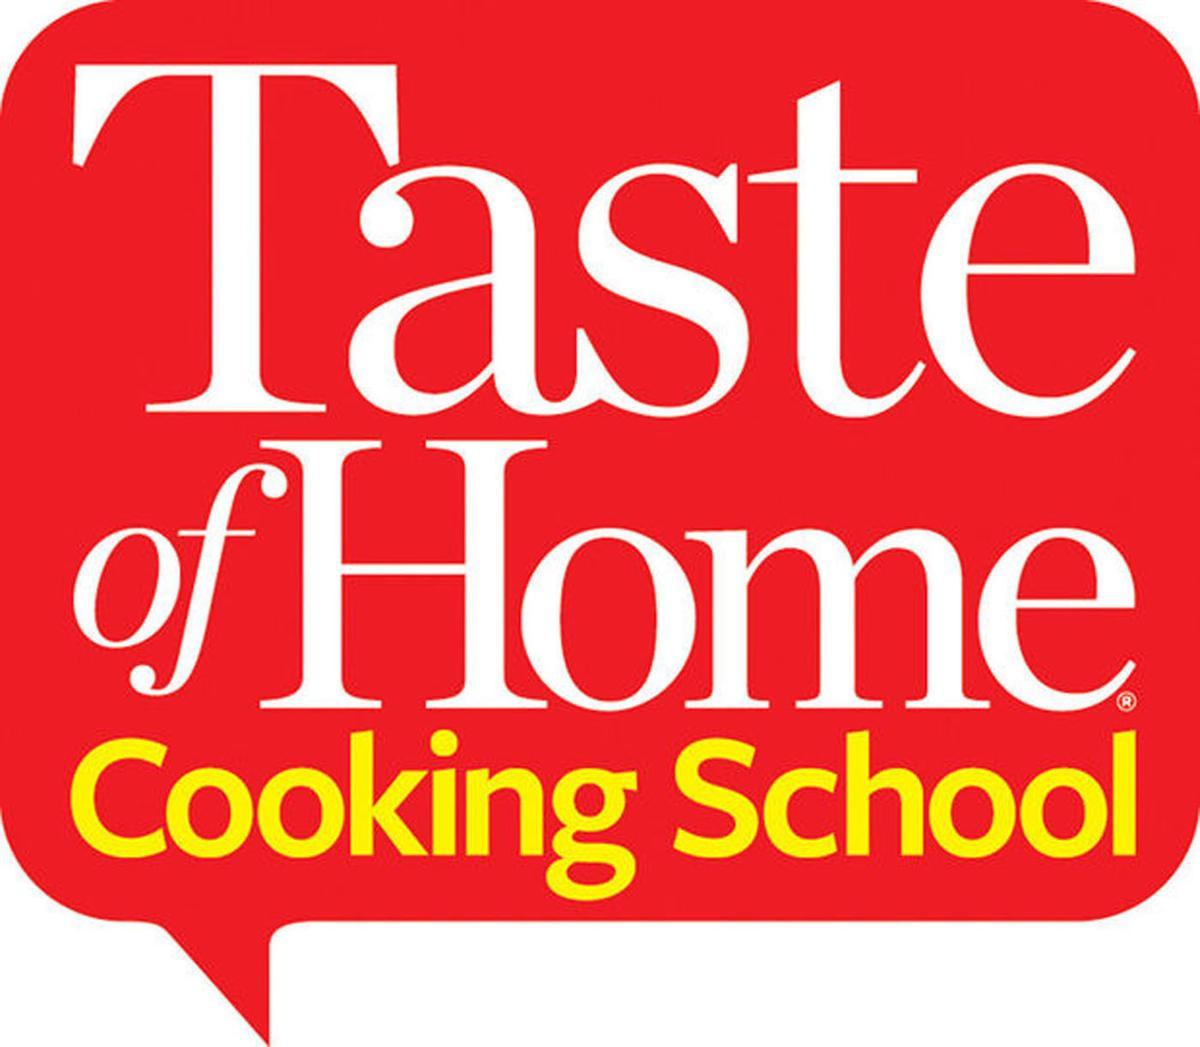 Tasteofhome.com Logo - Taste of Home Cooking School to dish up good fun, food, prizes